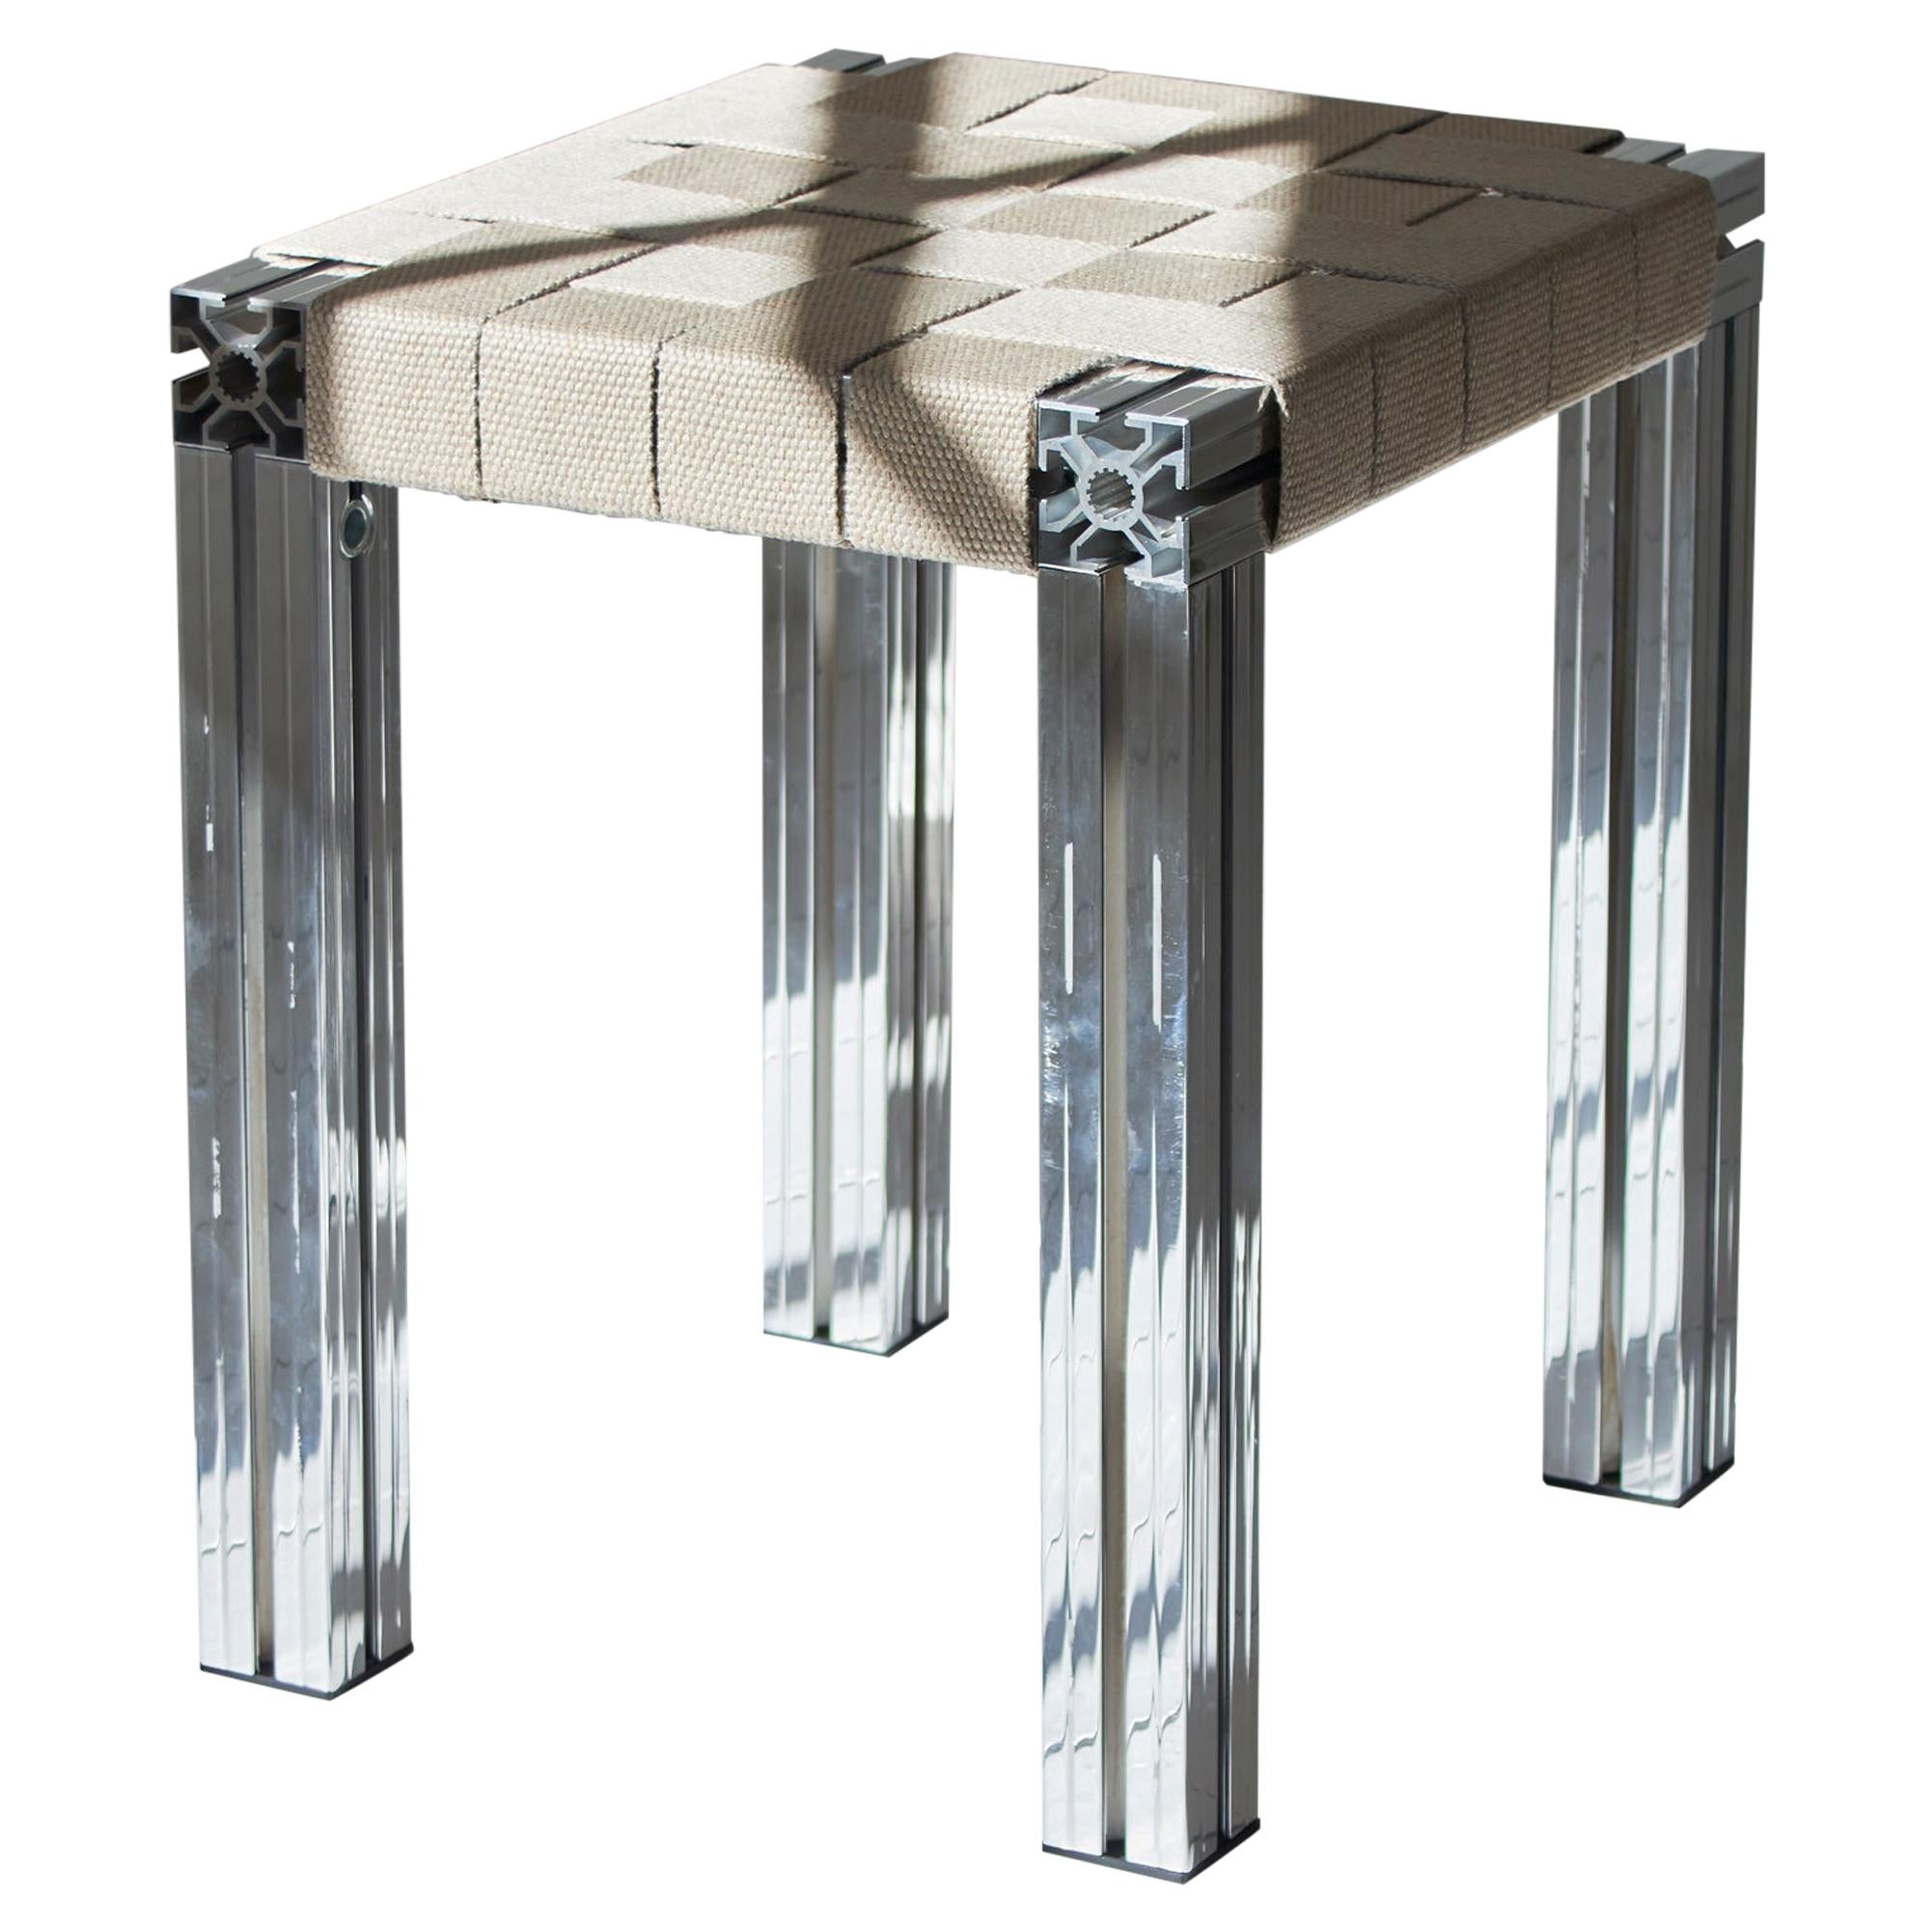 Polished Aluminium Stool with Flax Webbing Seat from Anodised Wicker Collection